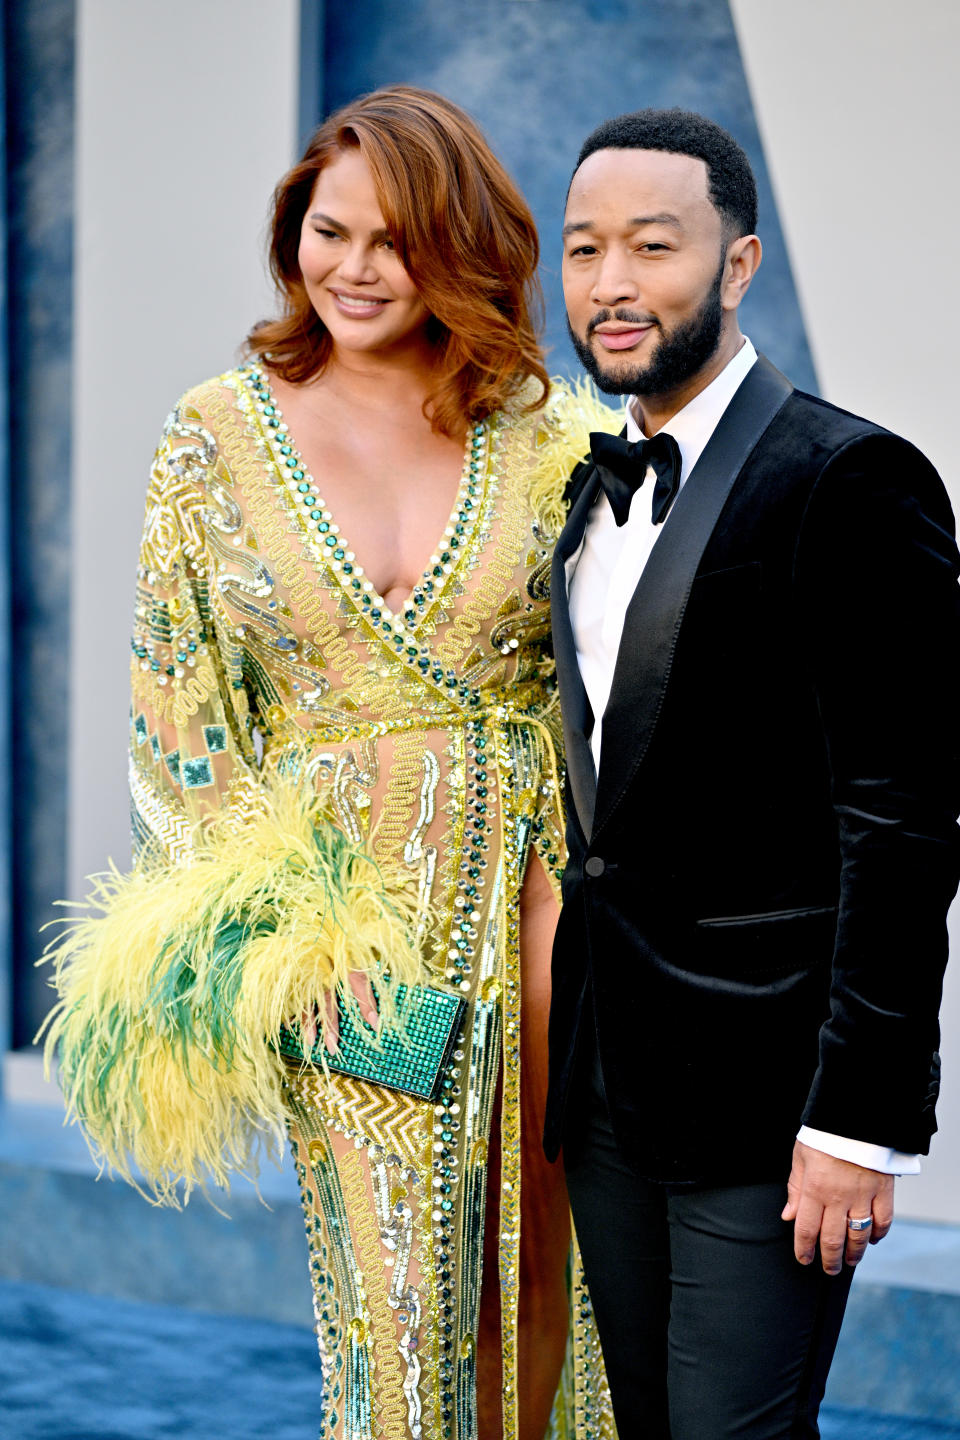 BEVERLY HILLS, CALIFORNIA - MARCH 12: Christine Teigen and John Legend attend the 2023 Vanity Fair Oscar Party Hosted By Radhika Jones at Wallis Annenberg Center for the Performing Arts on March 12, 2023 in Beverly Hills, California. (Photo by Lionel Hahn/Getty Images)